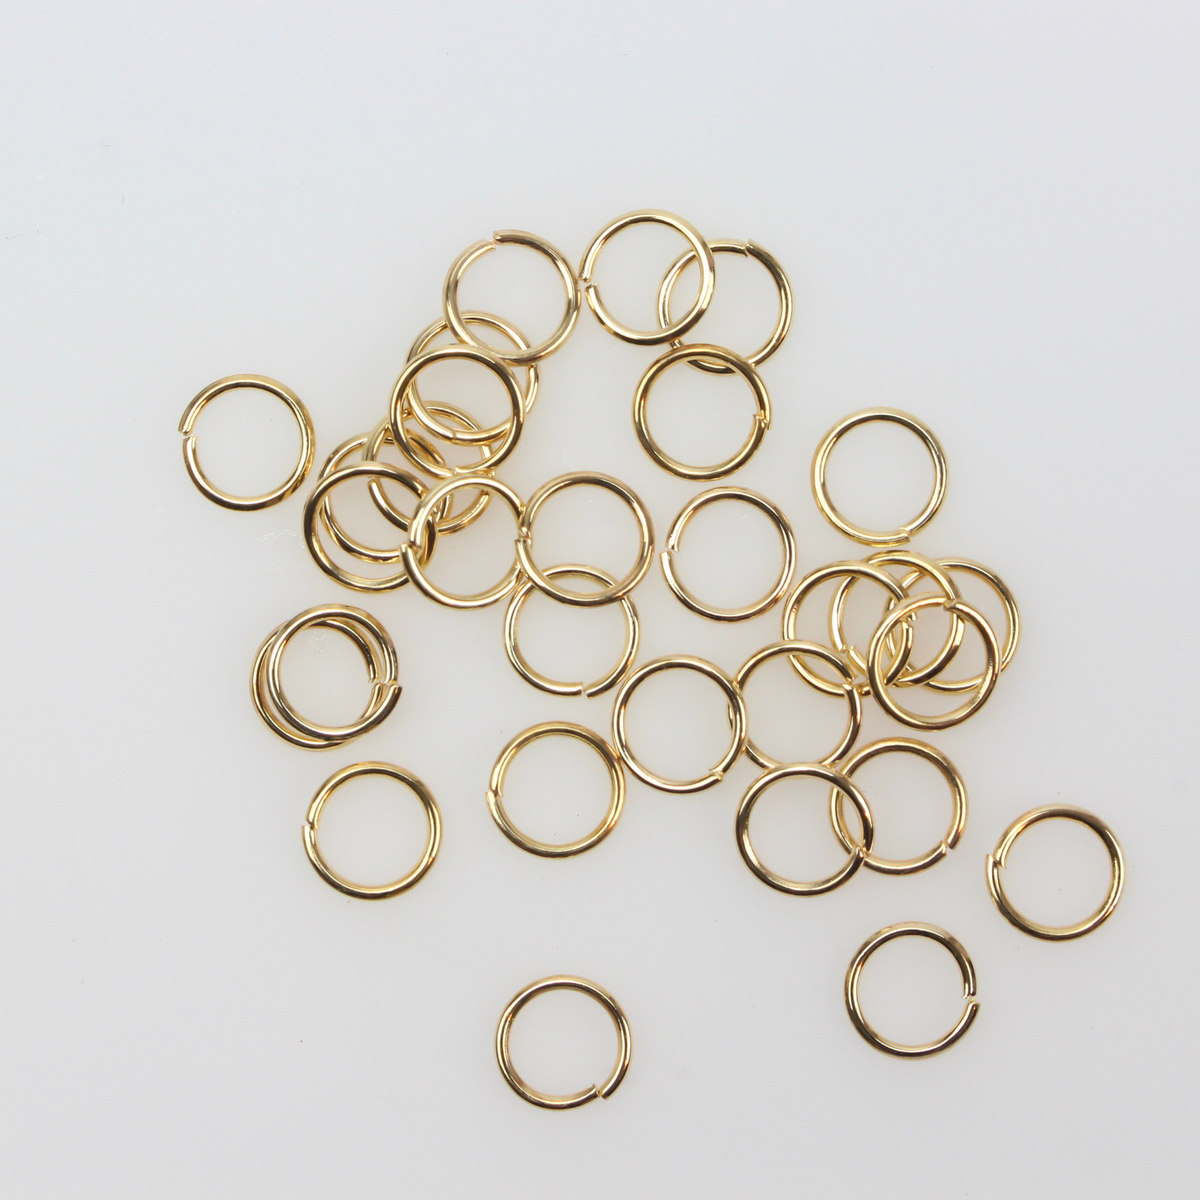 Light Gold Plated Iron Based Jump Rings 6mm 21 Gauge, 100pcs per package –  Small Devotions